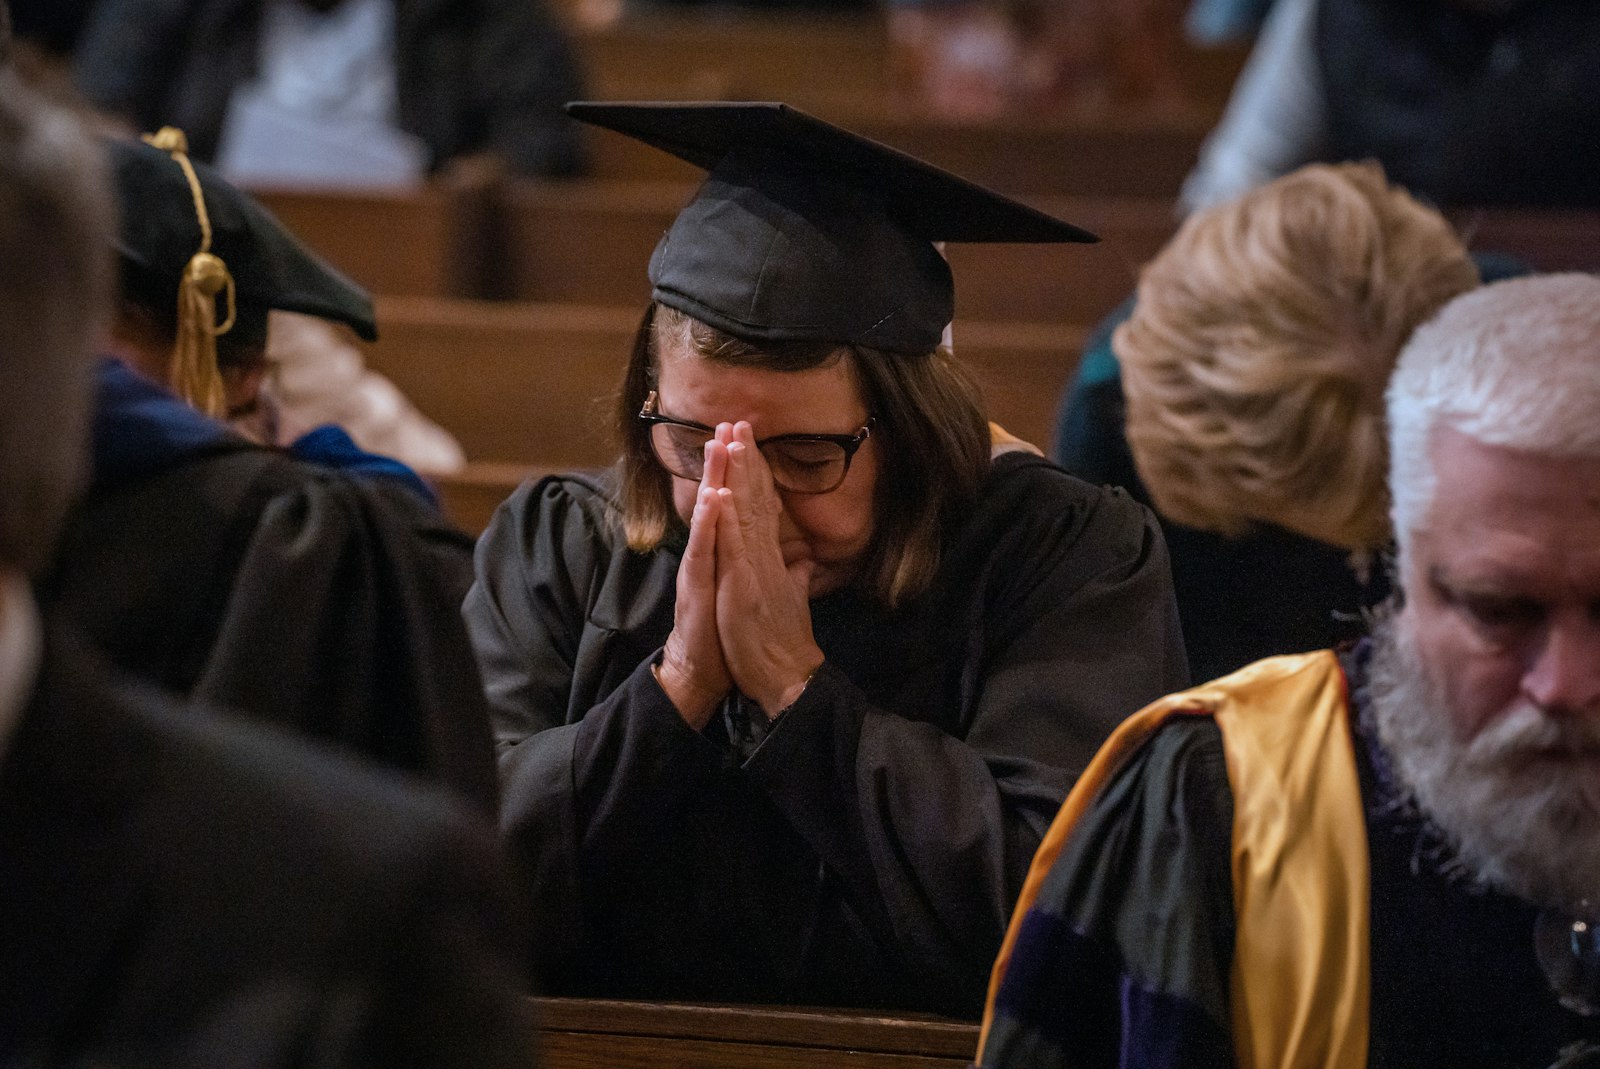 Astrid Caicedo, assistant dean of studies and director of accreditation for Sacred Heart Major Seminary, prays during the 98th commencement exercises and baccalaureate Mass April 29 in the seminary's chapel.